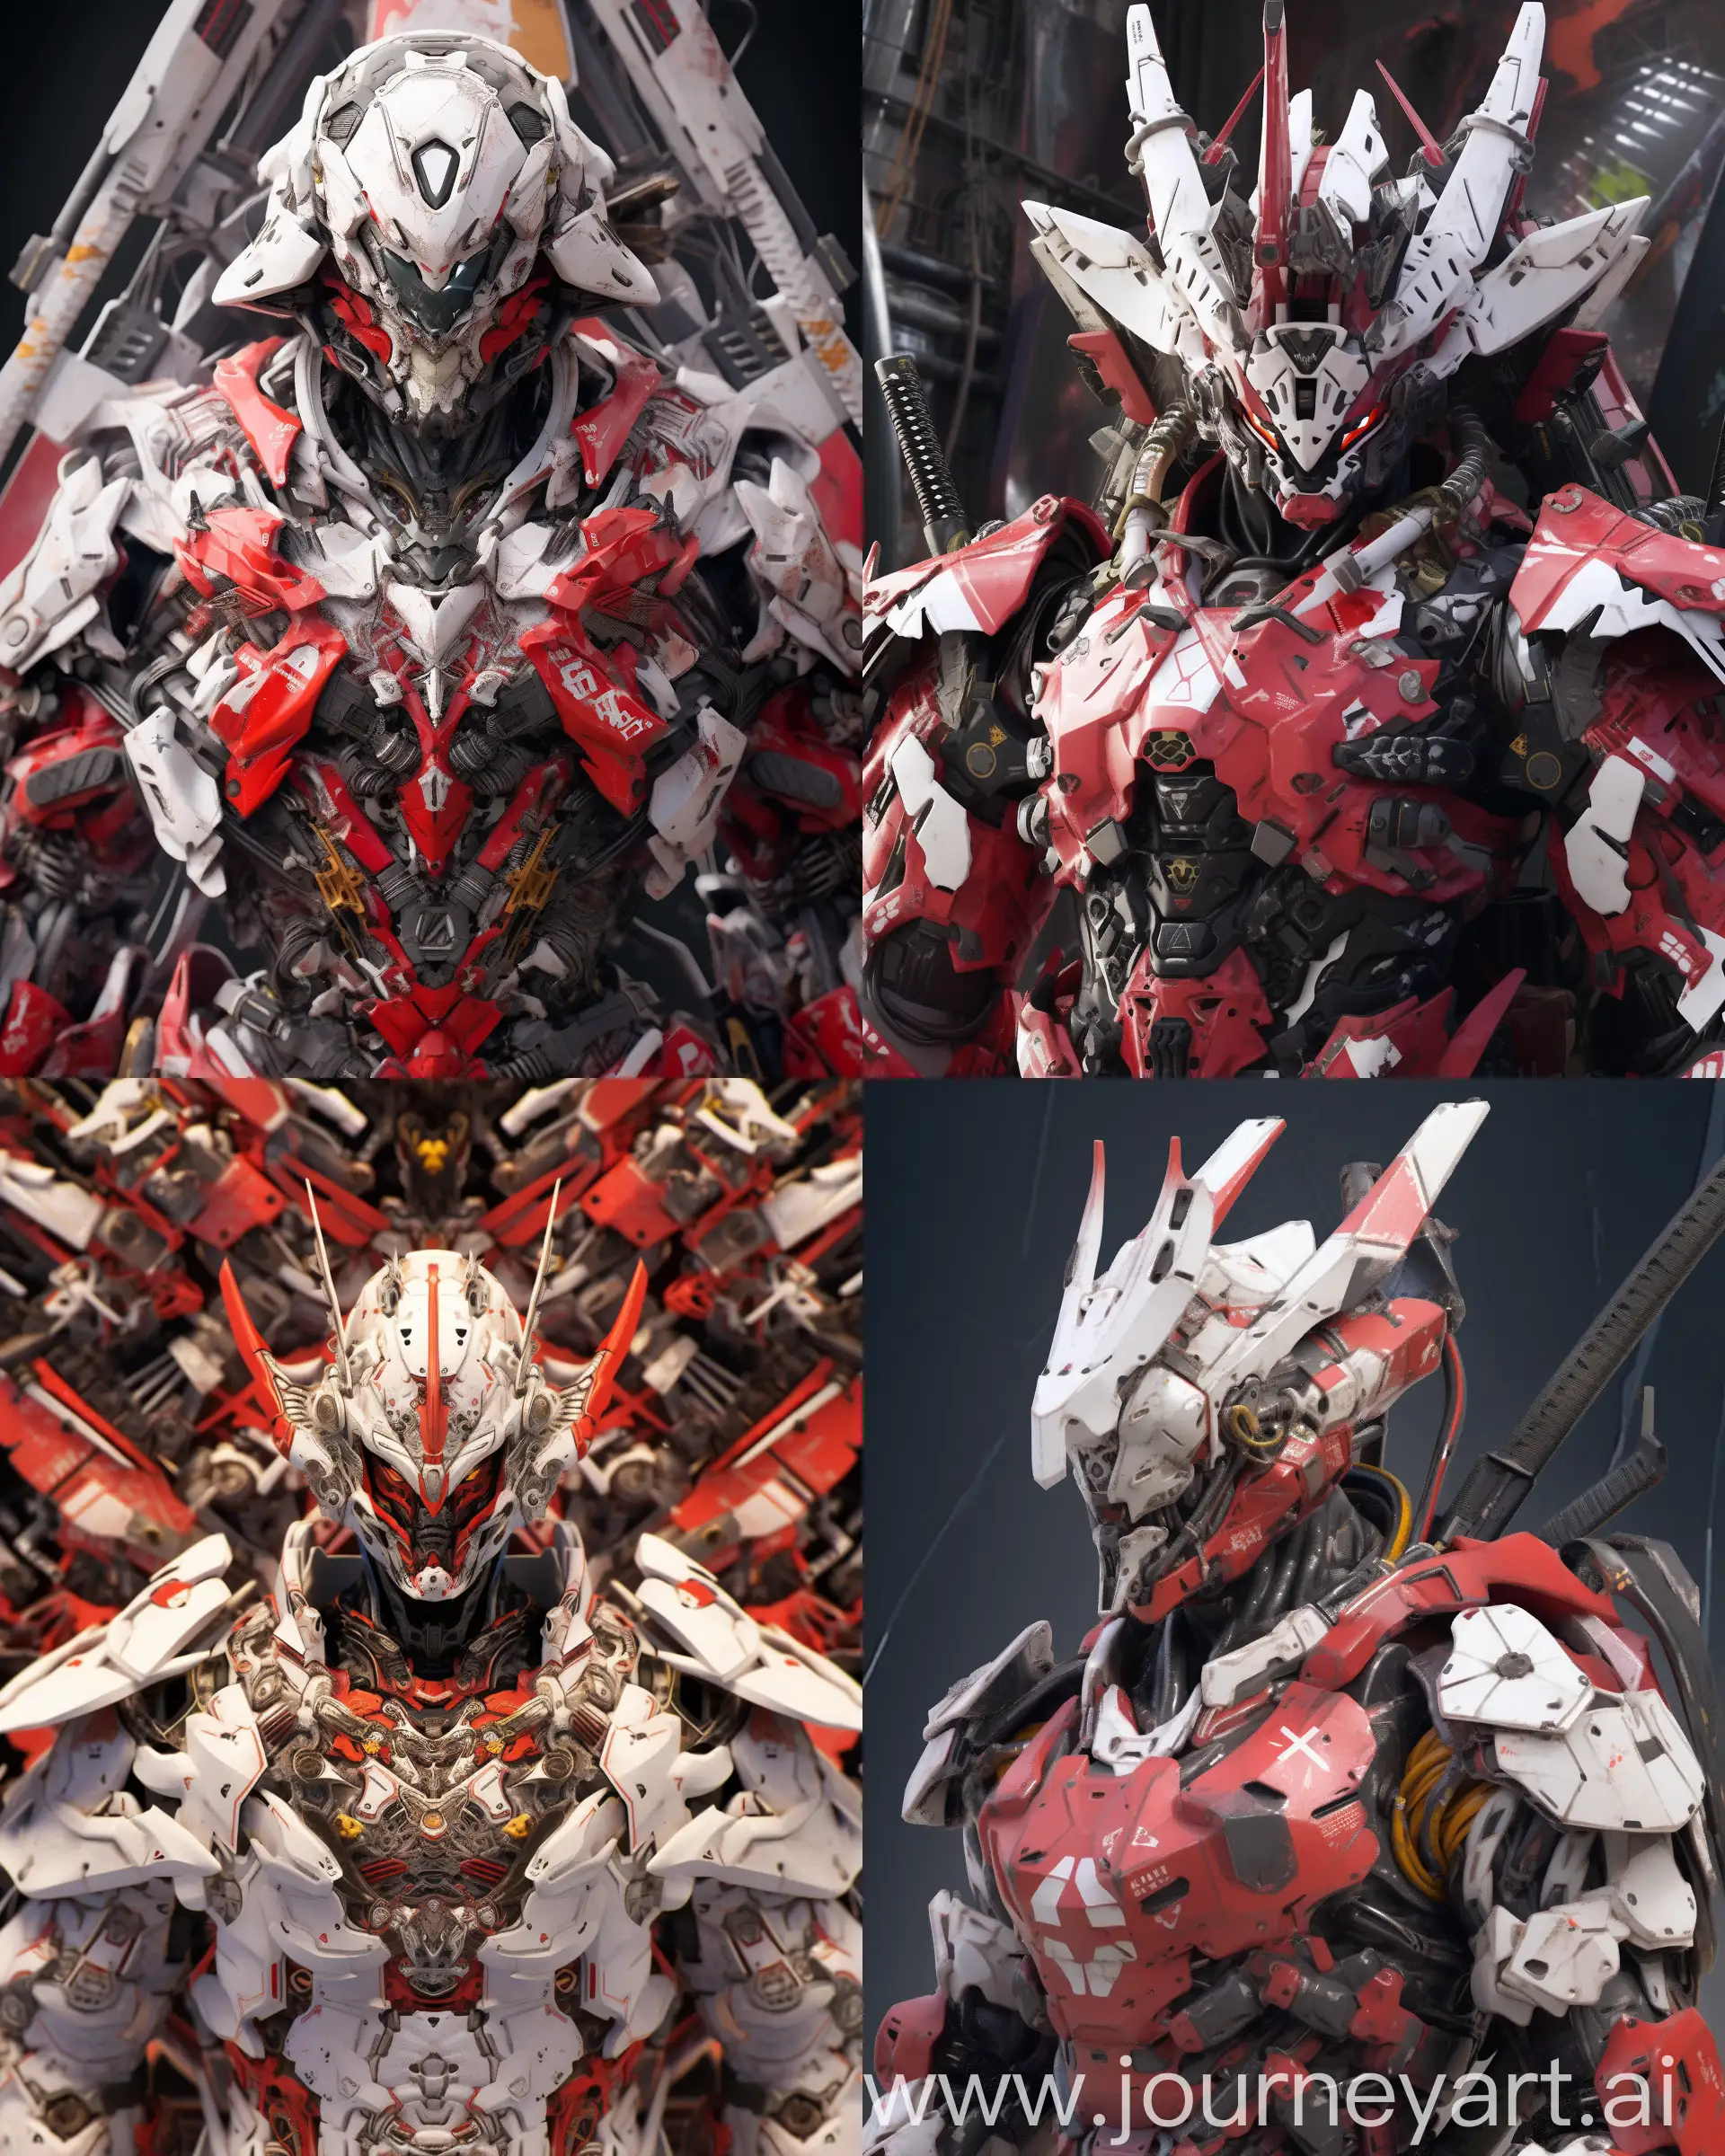 extreme realism, hyper-detailed real photo, full-body image of a futuristic menacing robot, go brrr, elite heistcore, hyper-realistic, white and red color scheme mech suit made of steel blades, 😱 chaos · nightmare resin, black metallic samurai garment, saudi futuristic warrior mecha, full-cosplay, 🕹️ 😎 🔫 🤖 🚬, painted action figure, stealth suit, full costume, shot by Walter Loss Jr’s super-16 —niji 5 —ar 4:5
